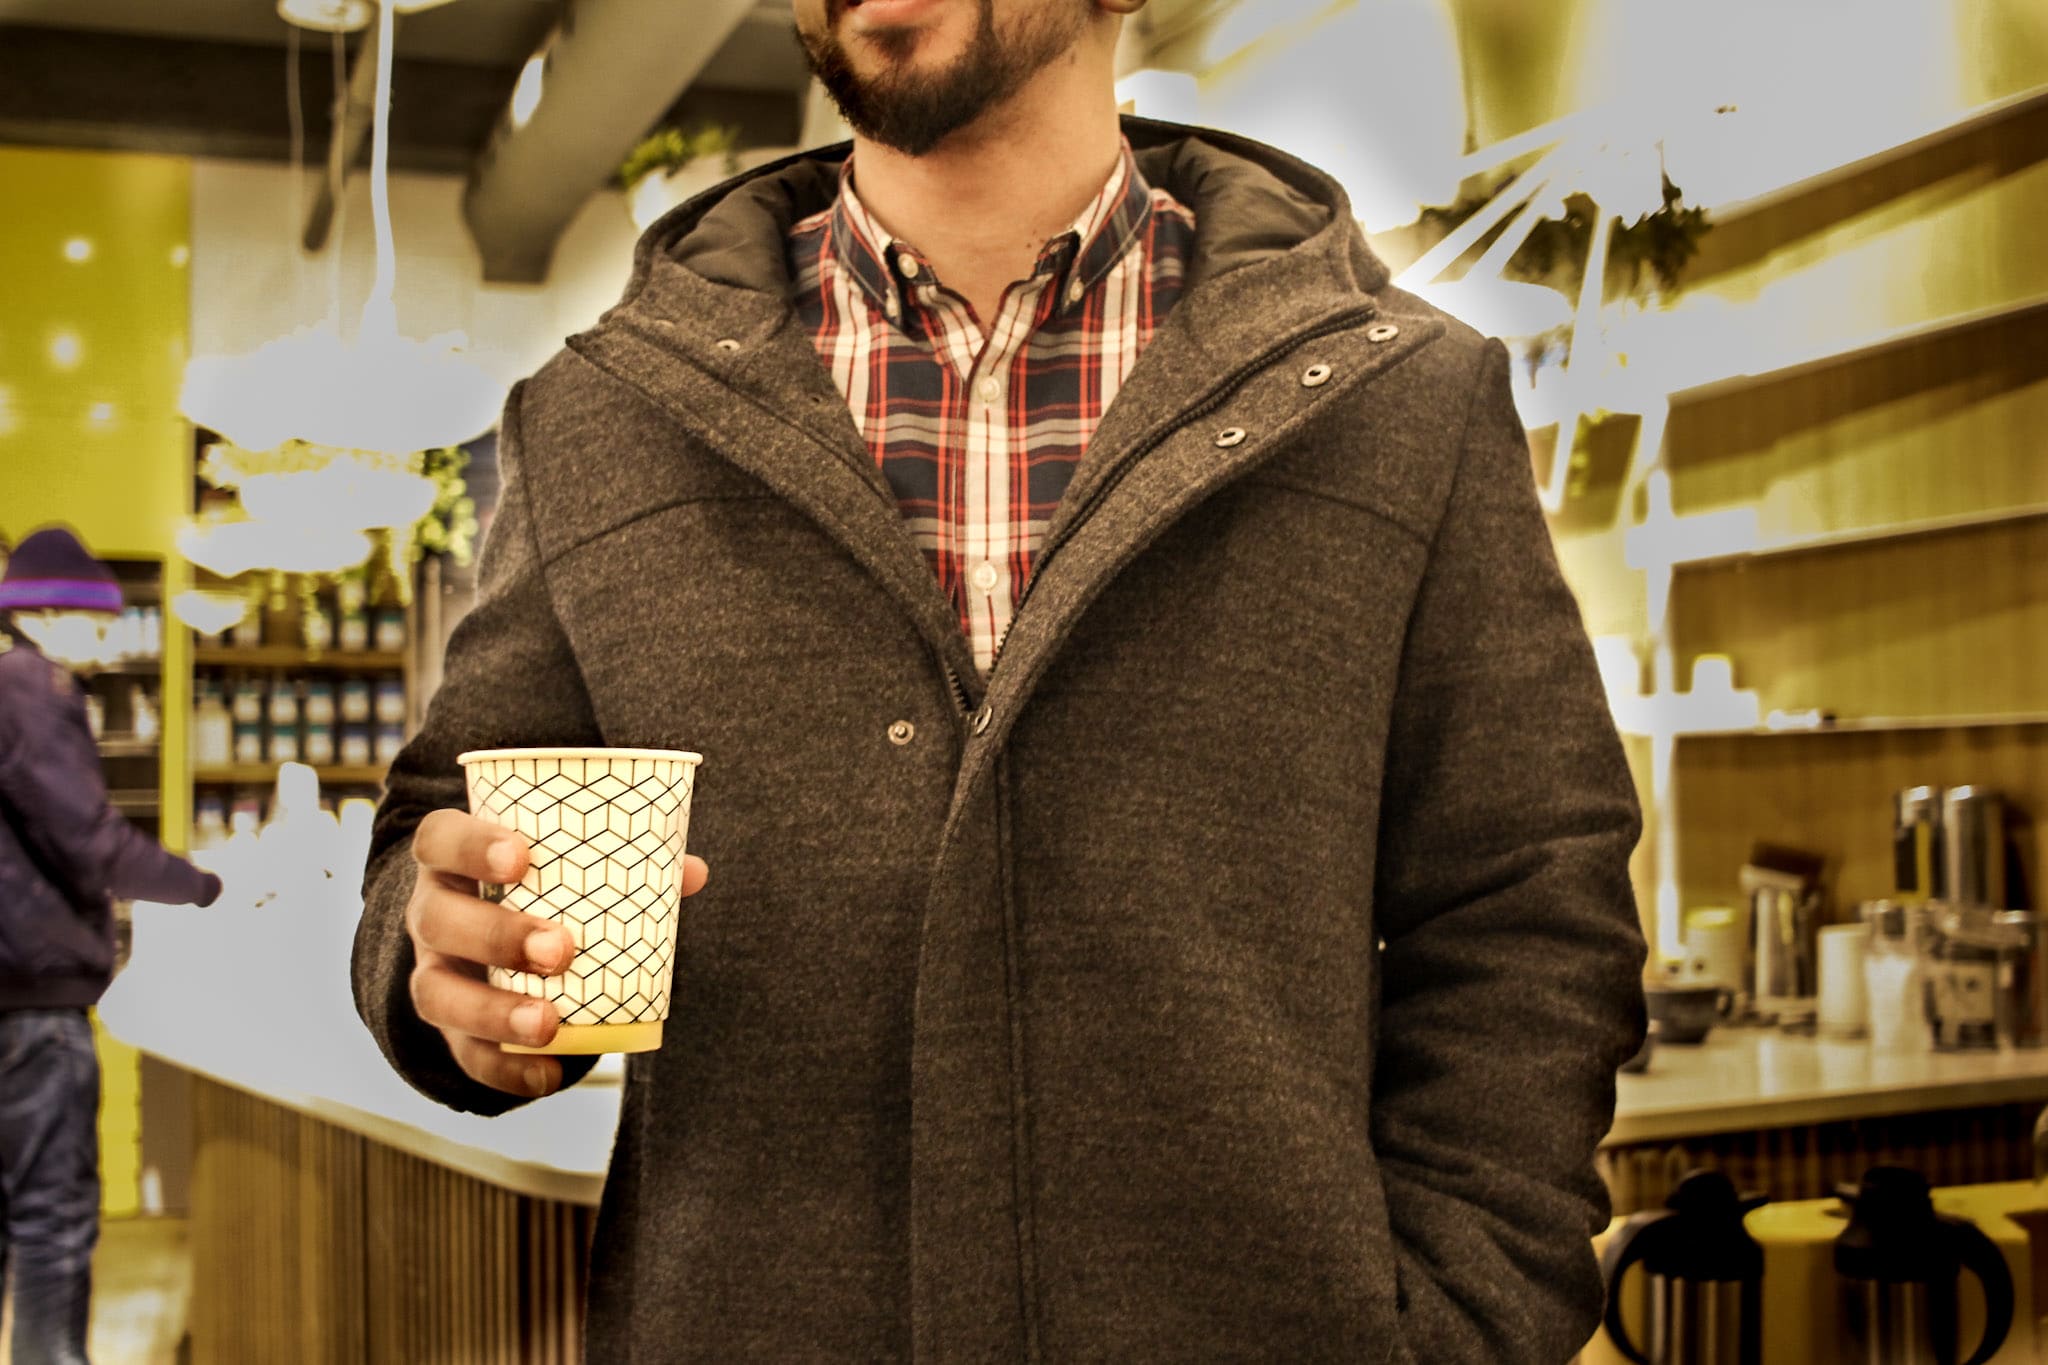 a customer holding a cup of pilot coffee.